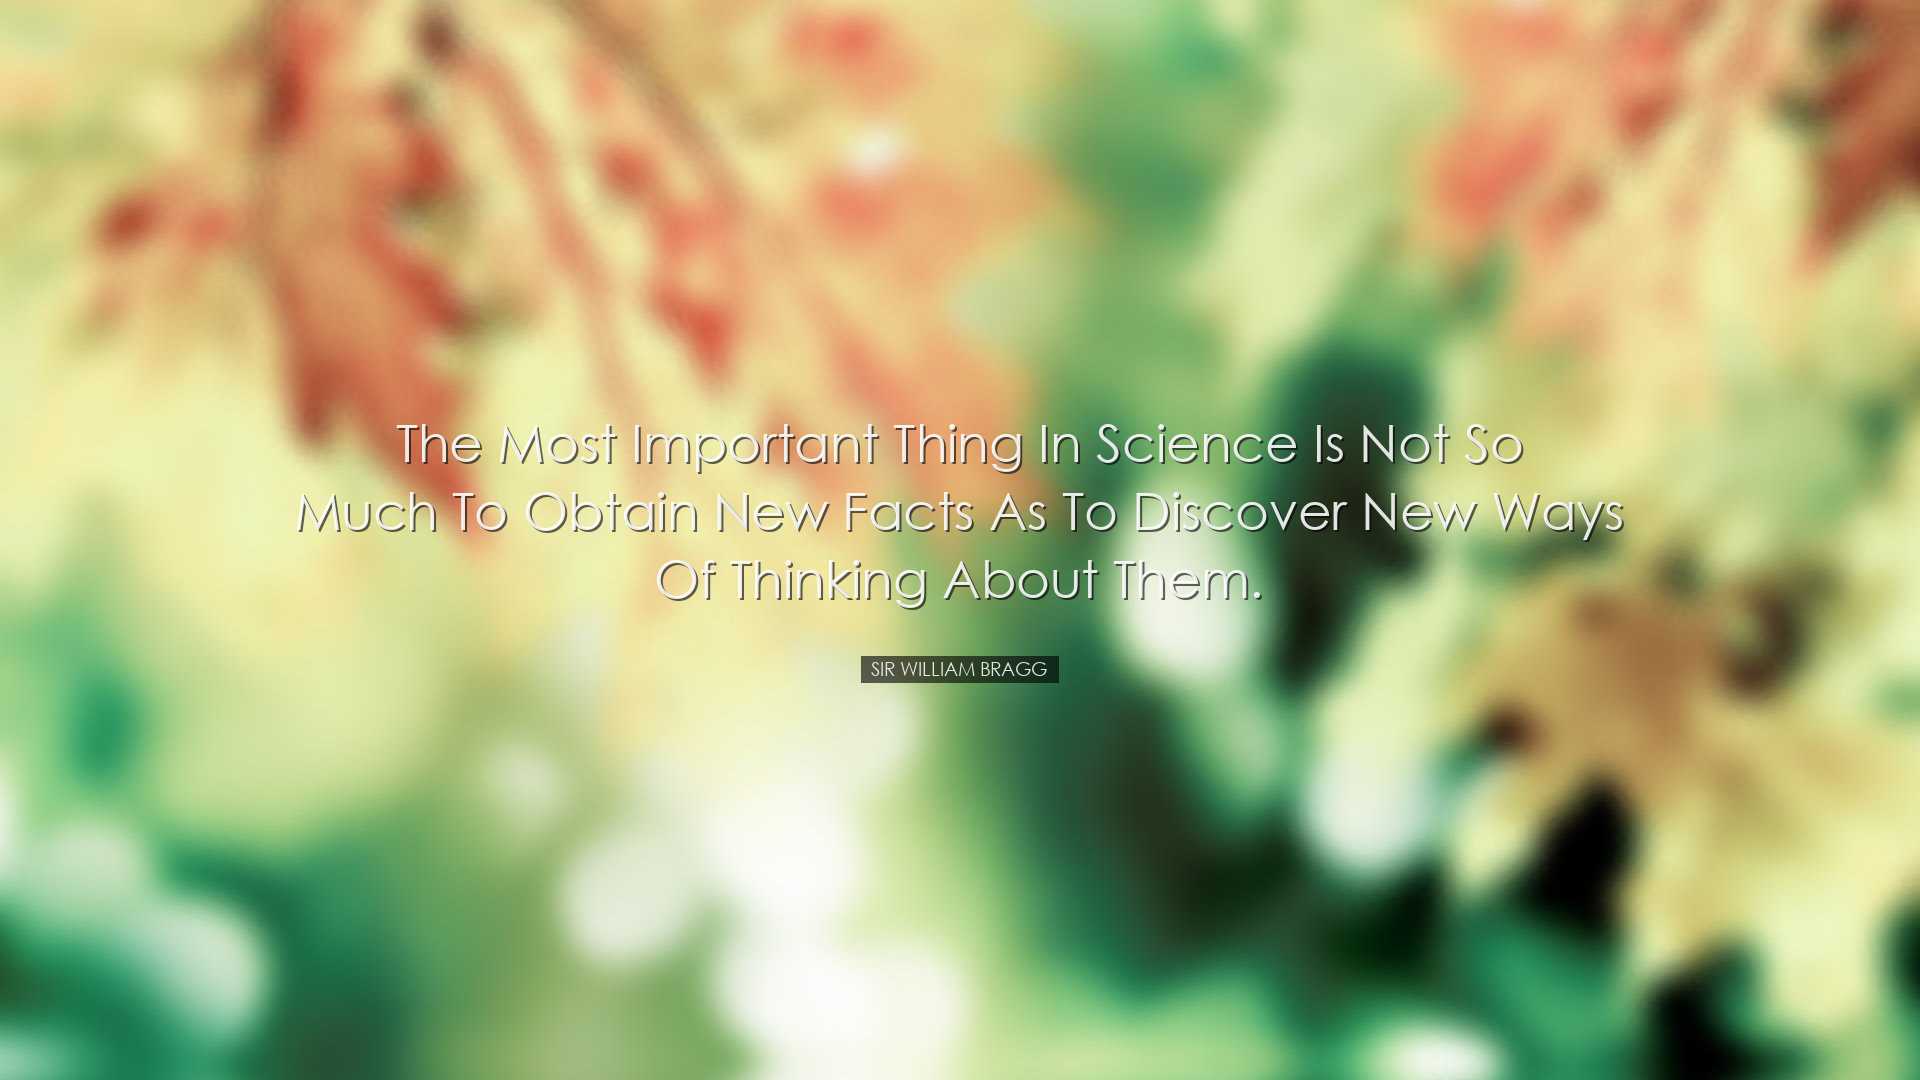 The most important thing in science is not so much to obtain new f